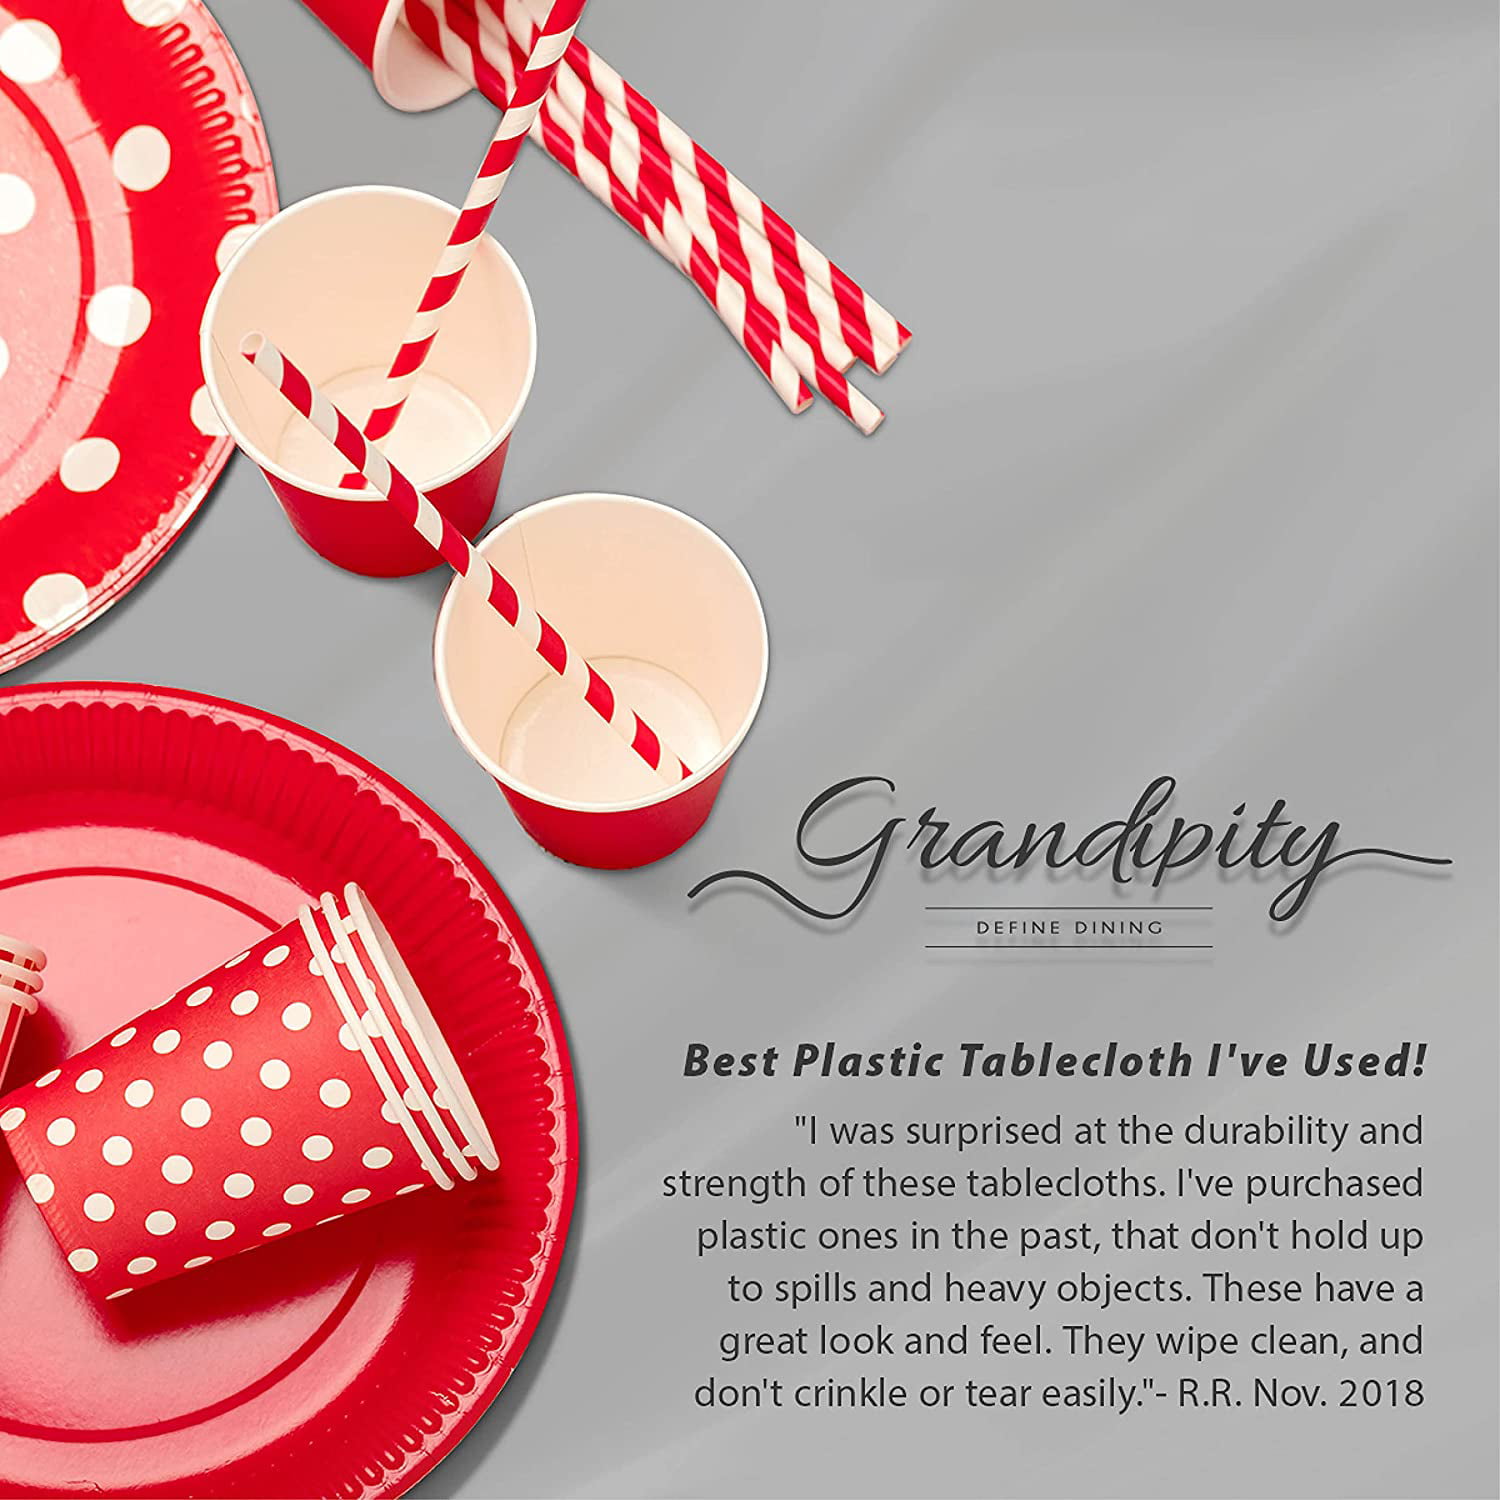 Decorative Rectangle Table Cover By Grandipity x 108 Inch Red Gingham Checkered 12 Pack Premium Disposable Plastic Picnic Tablecloth 54 Inch